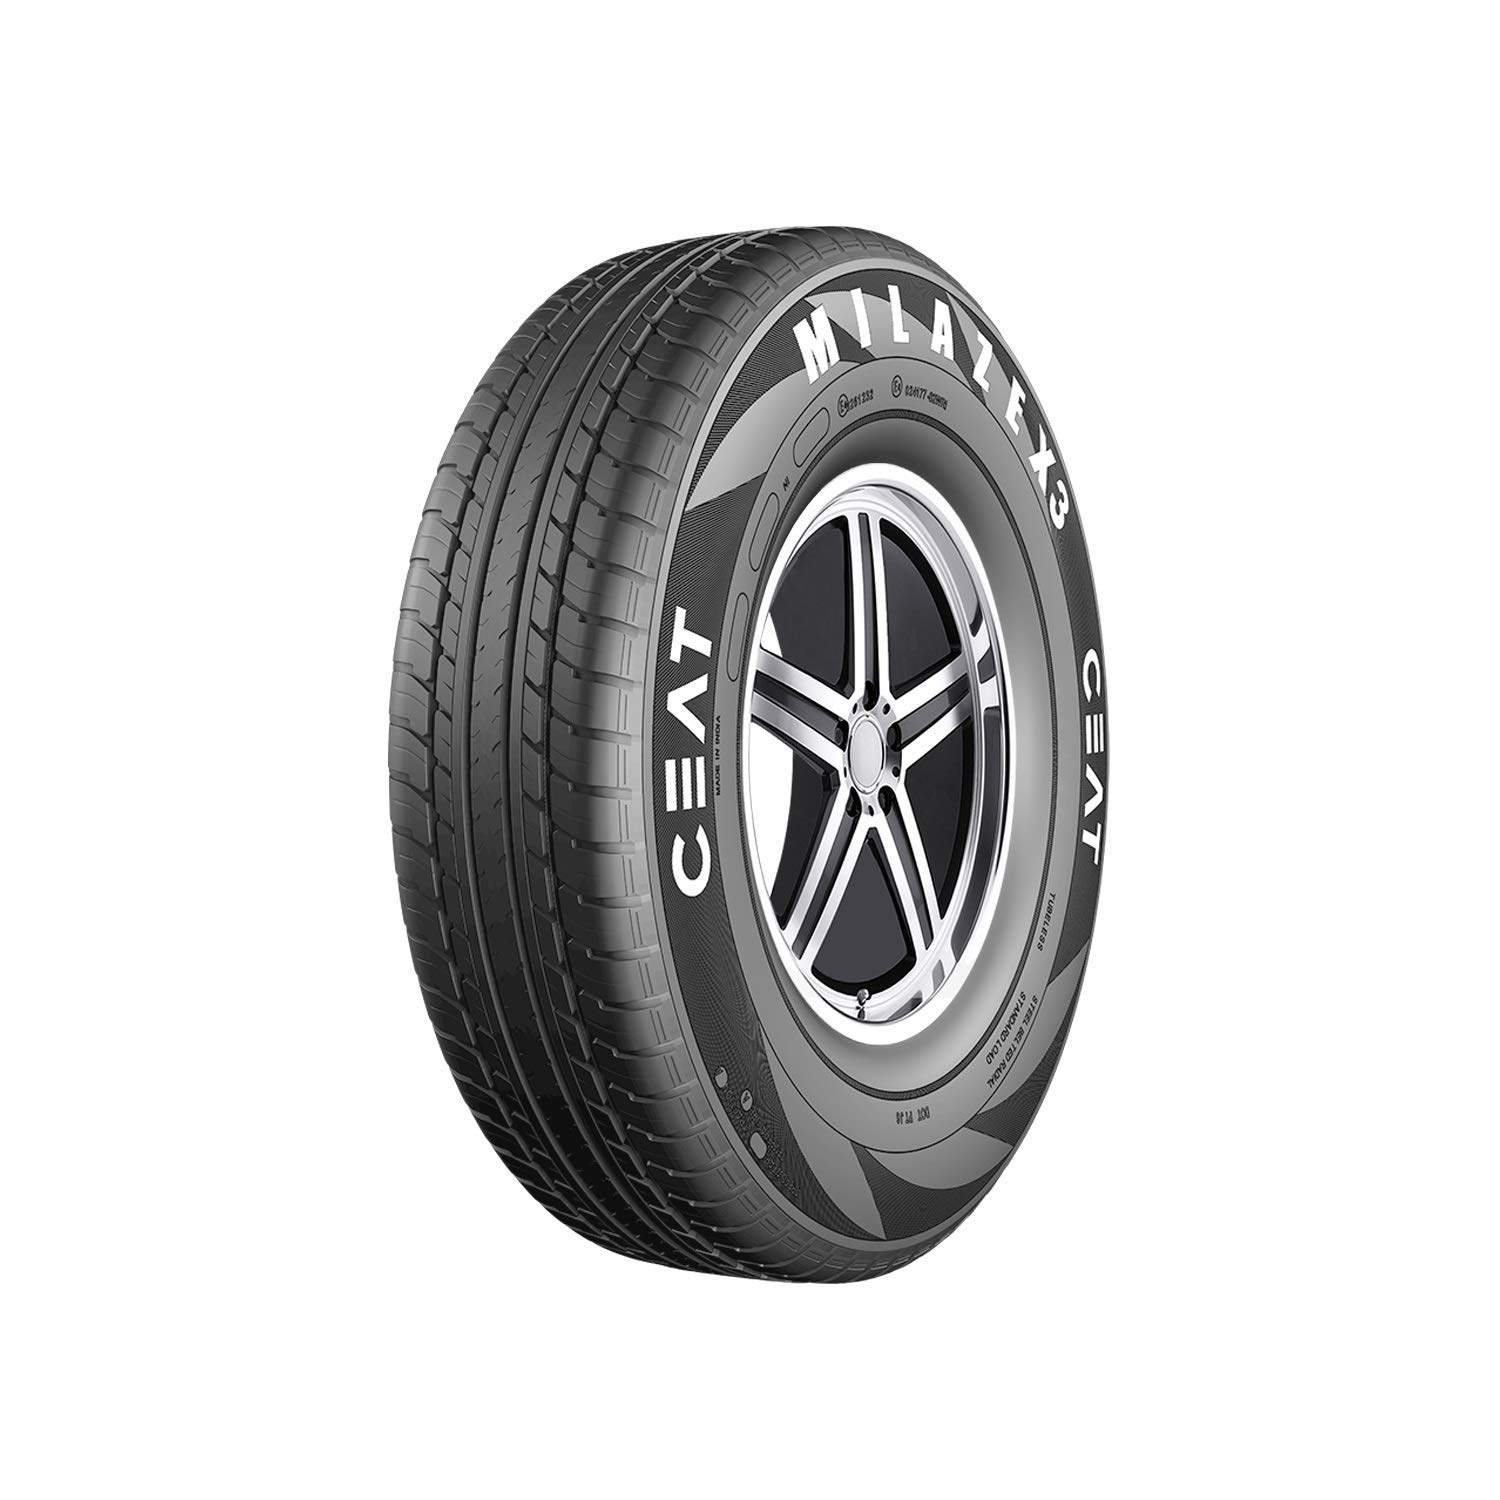 Ceat 185/65R14 MILEAZE X3 86T SW Tubeless Tyre